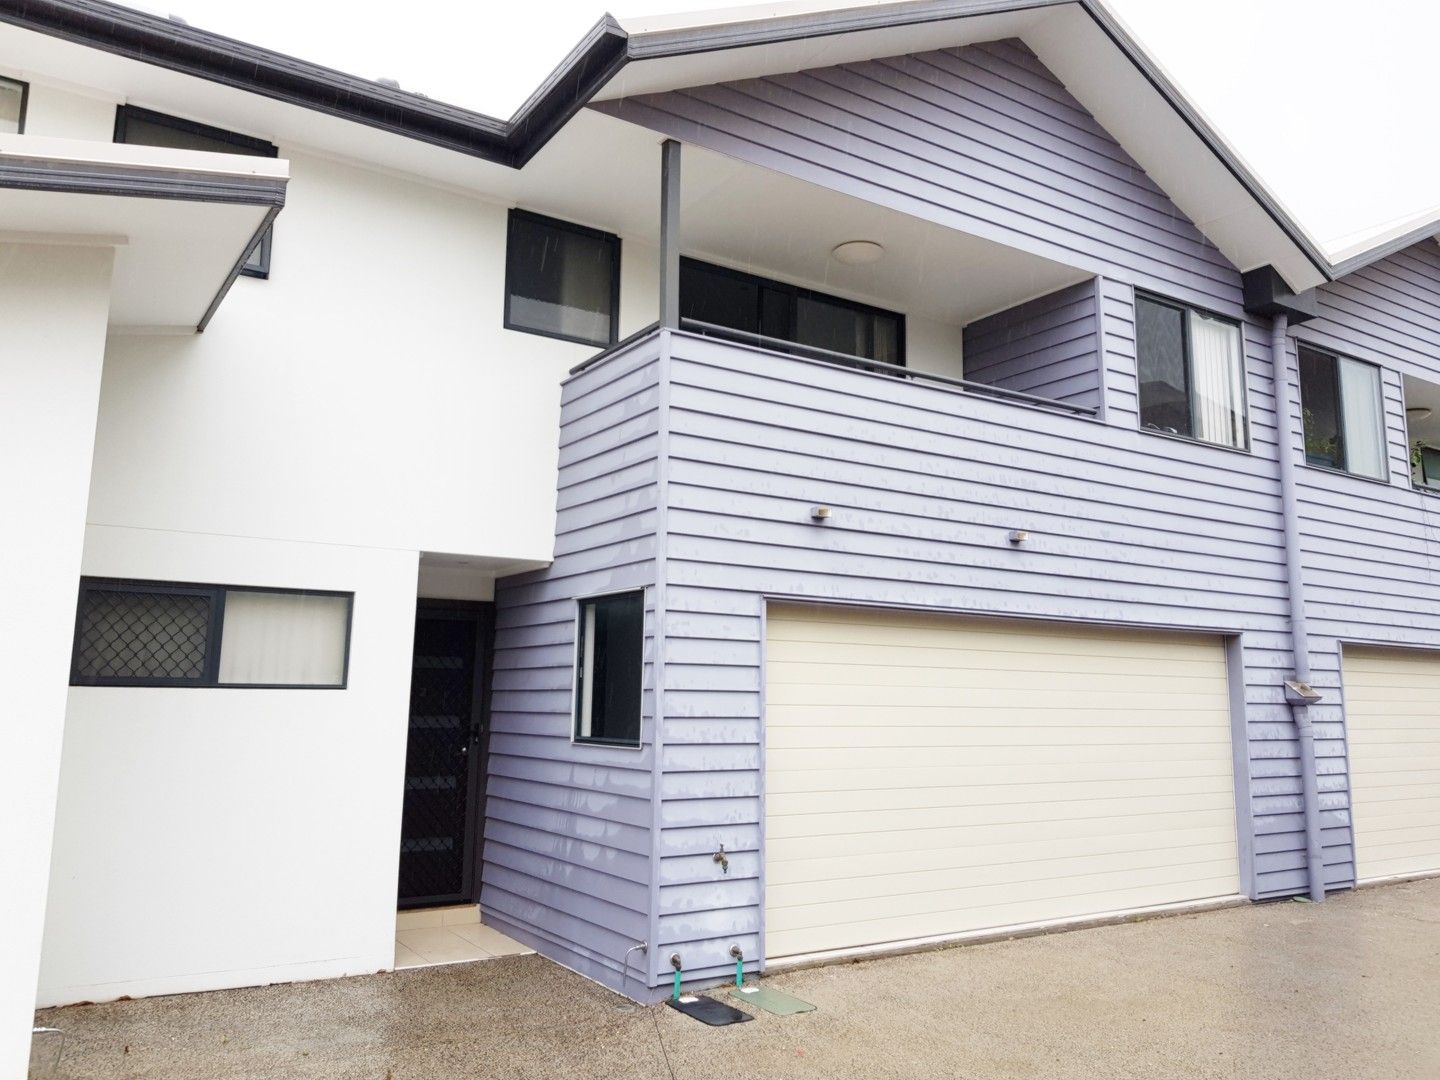 3 bedrooms Townhouse in 3/19 TILLEY STREET REDCLIFFE QLD, 4020